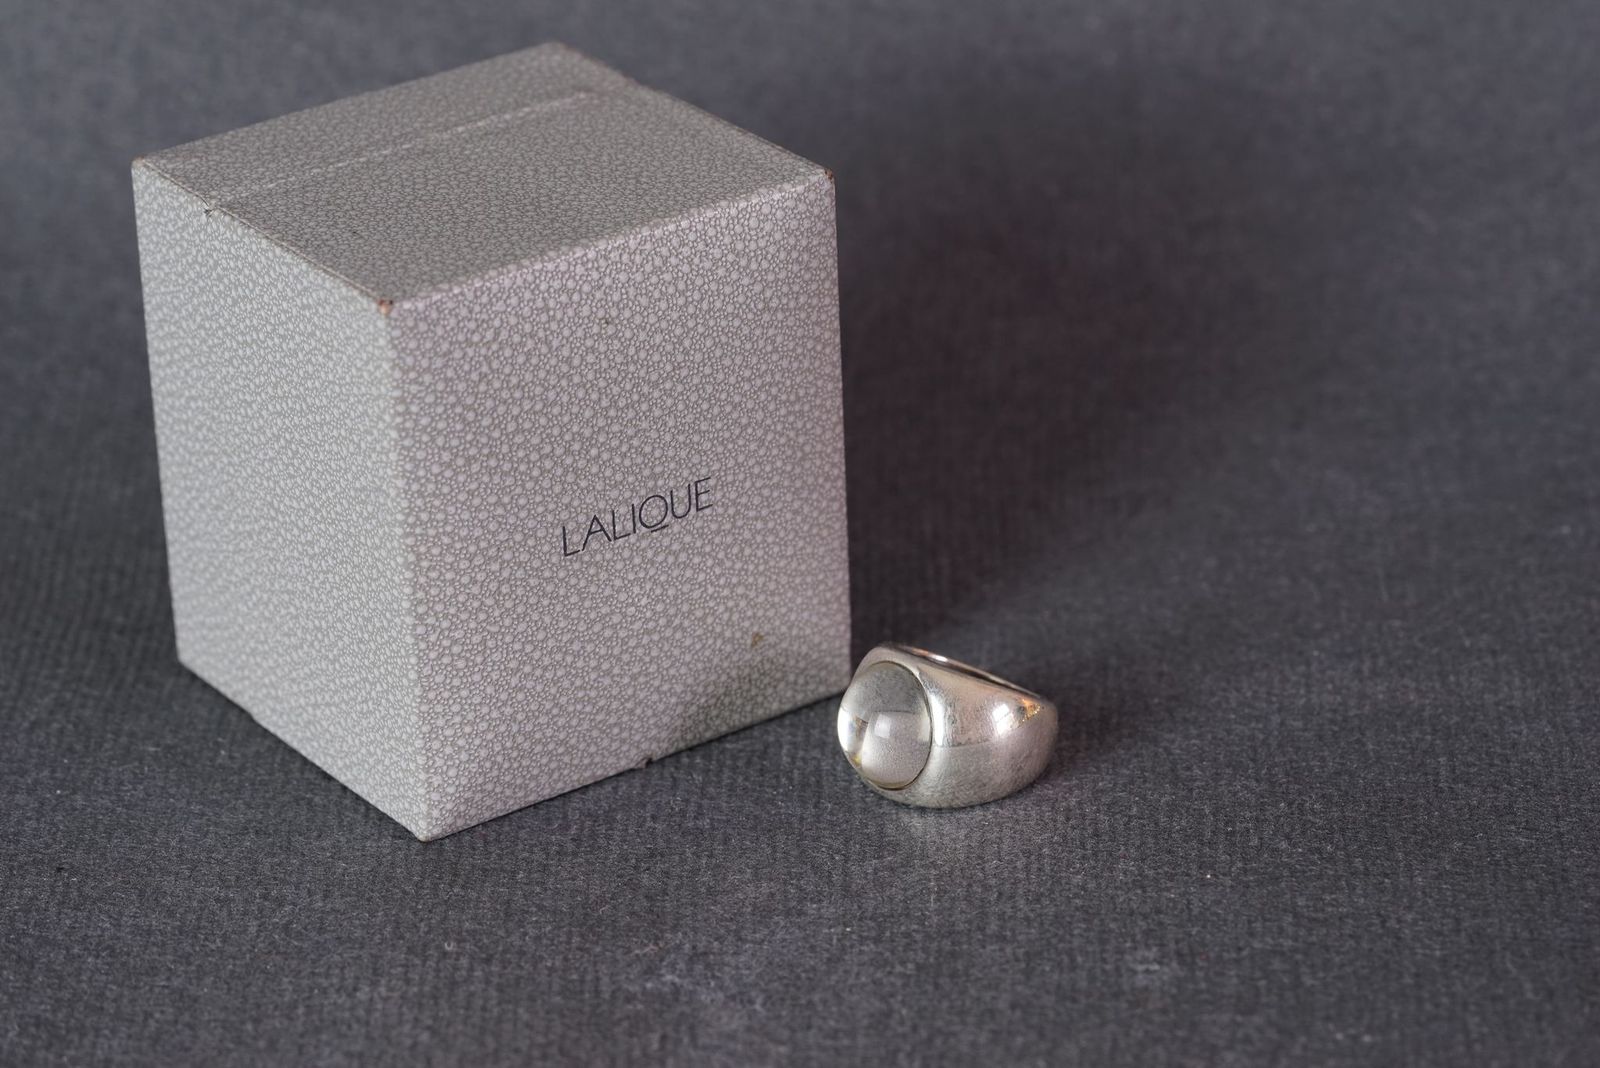 LADIES LALIQUE 925 STERLING SILVER RINGS W/ BOX & PAPERWORK, 925 sterling silver ring produced by